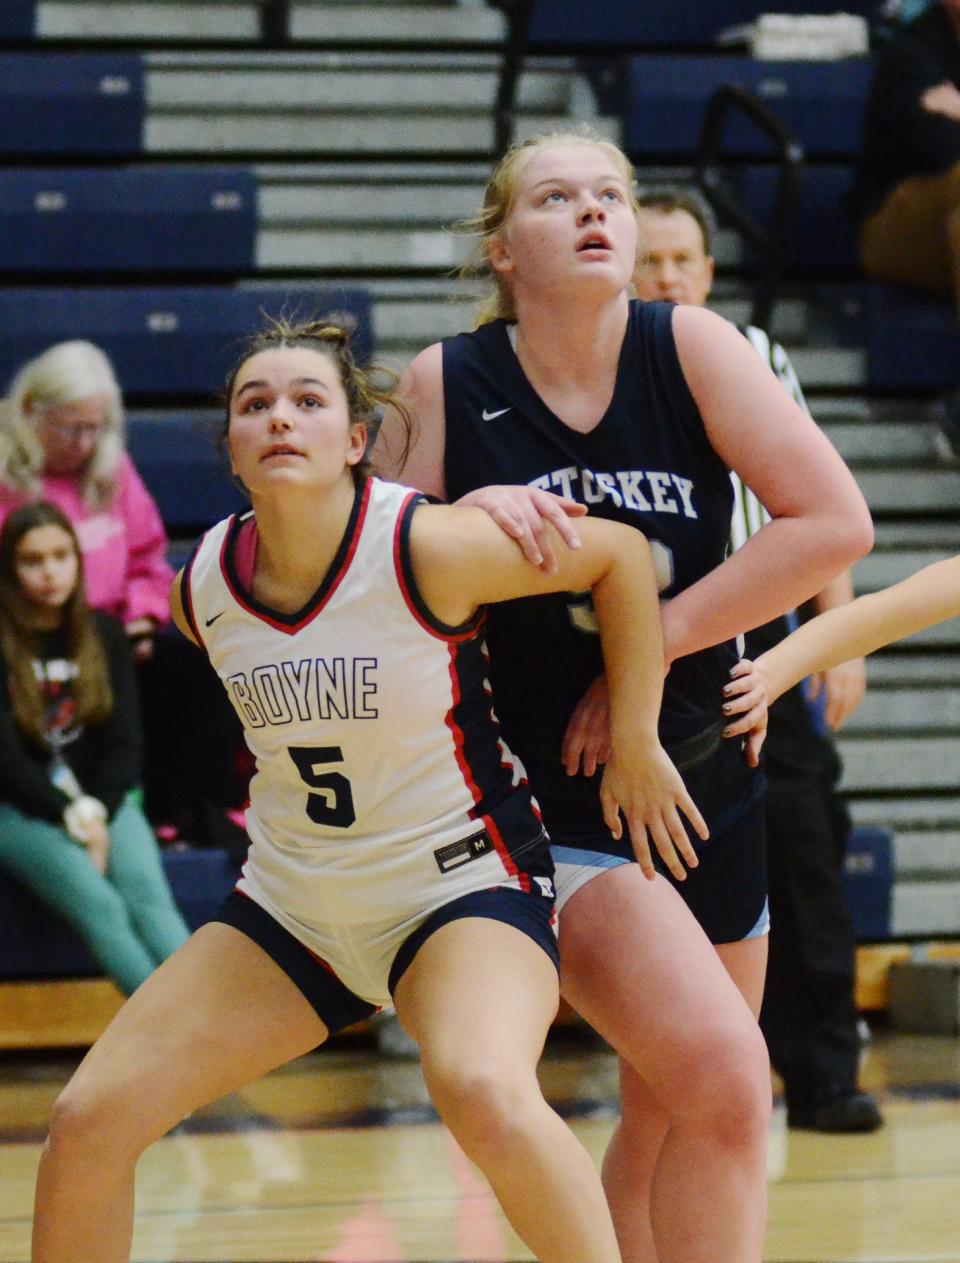 Boyne City's Elly Wilcox and Petoskey's Lia Trudeau watch a free thrown and gain positioning for a rebound.